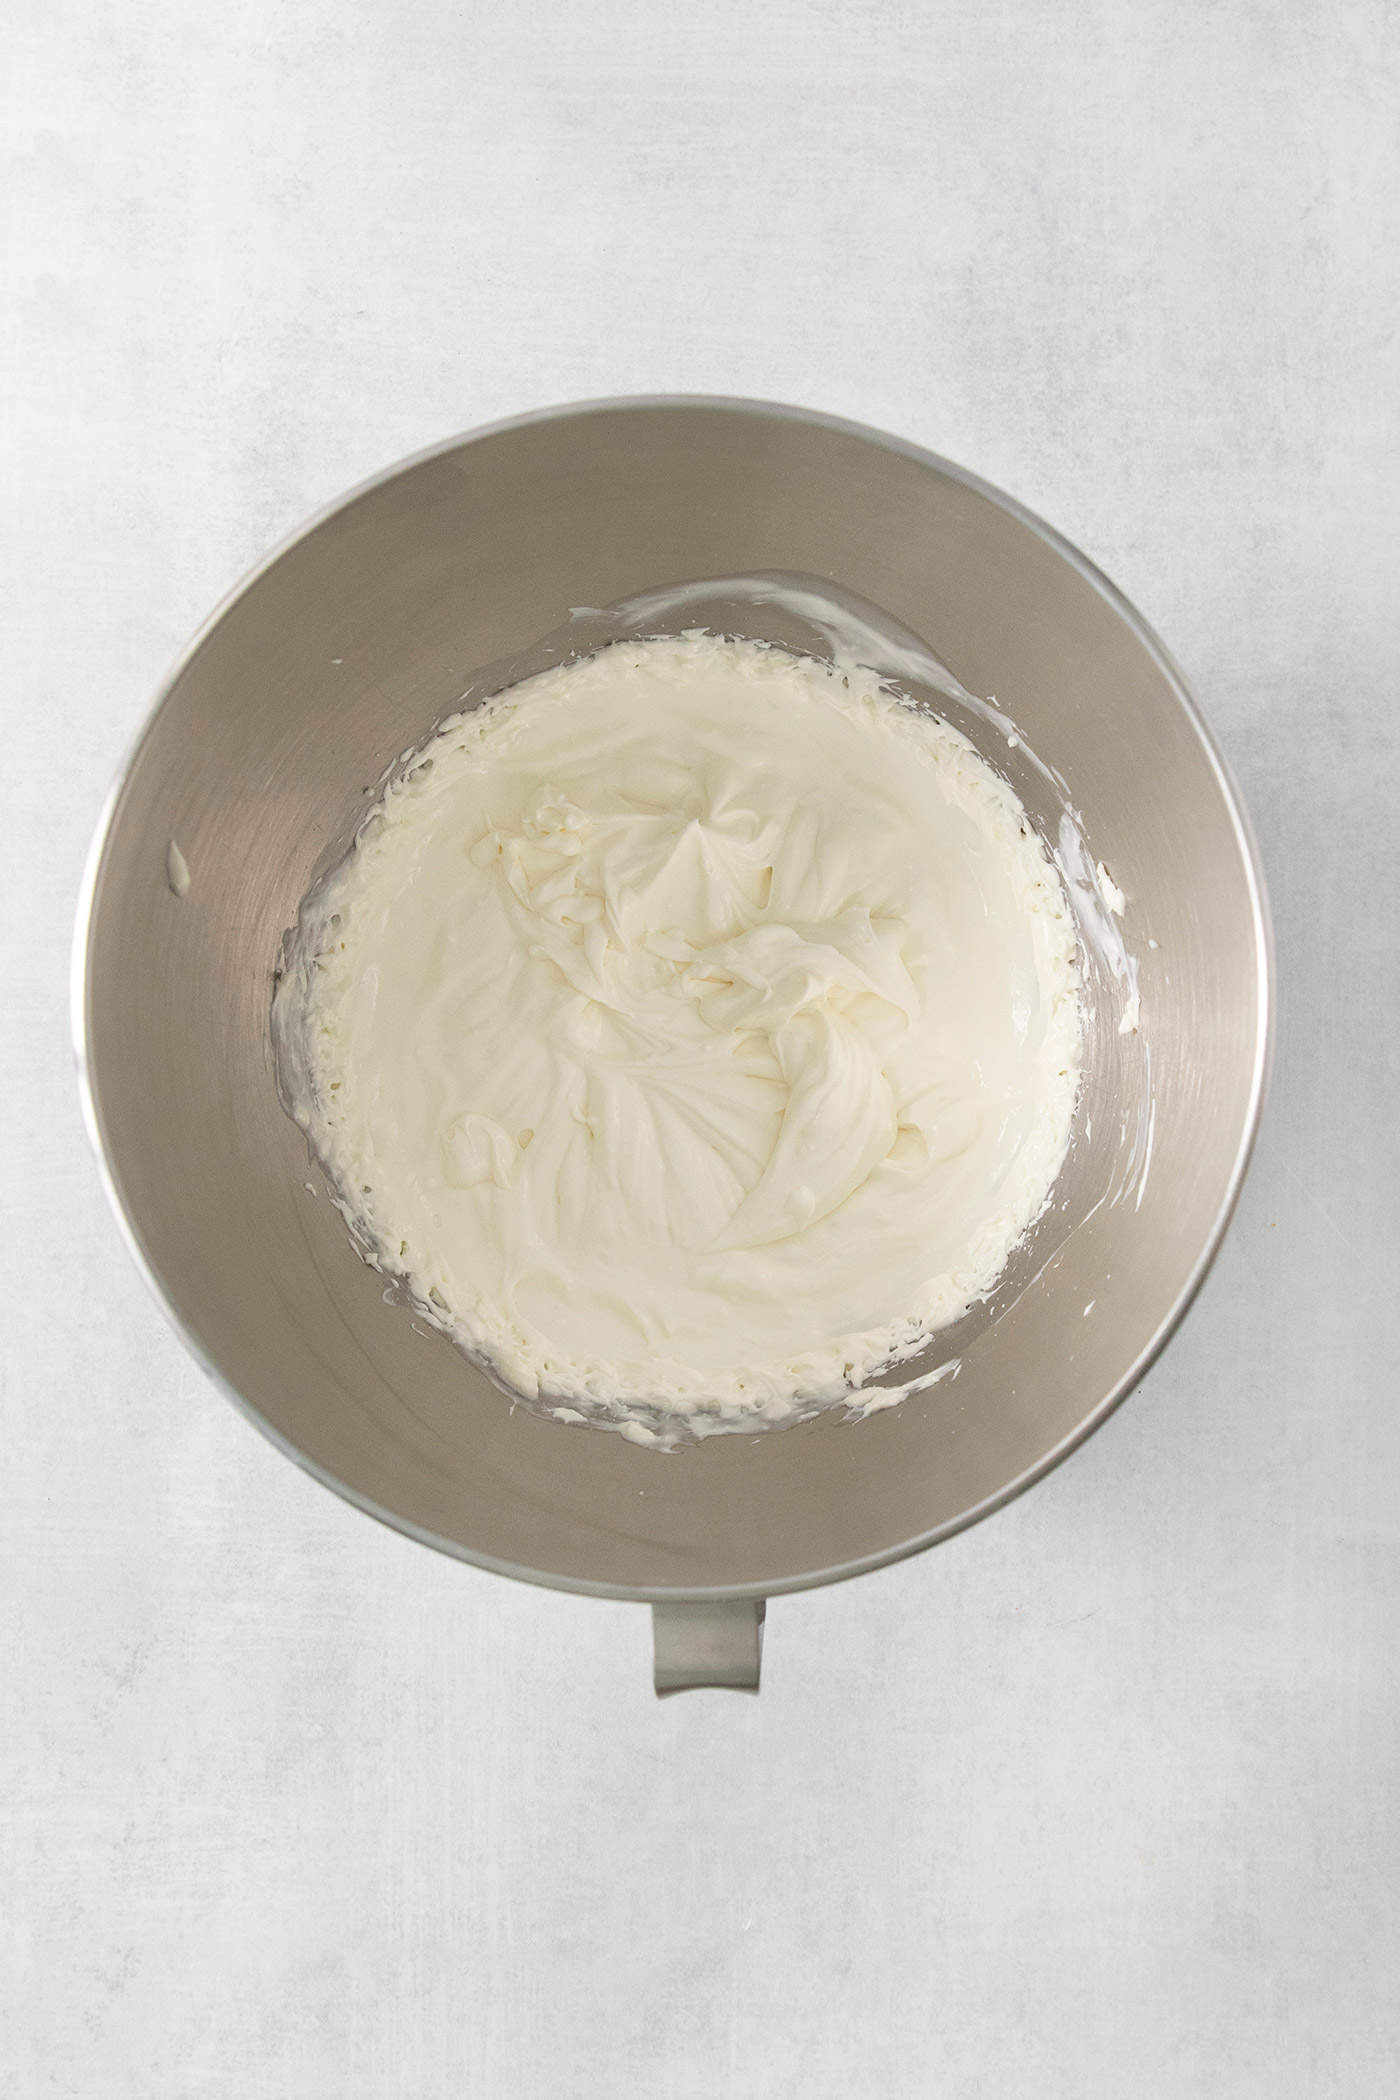 A metal bowl holds a blend of cream, cream cheese, and goat cheese.